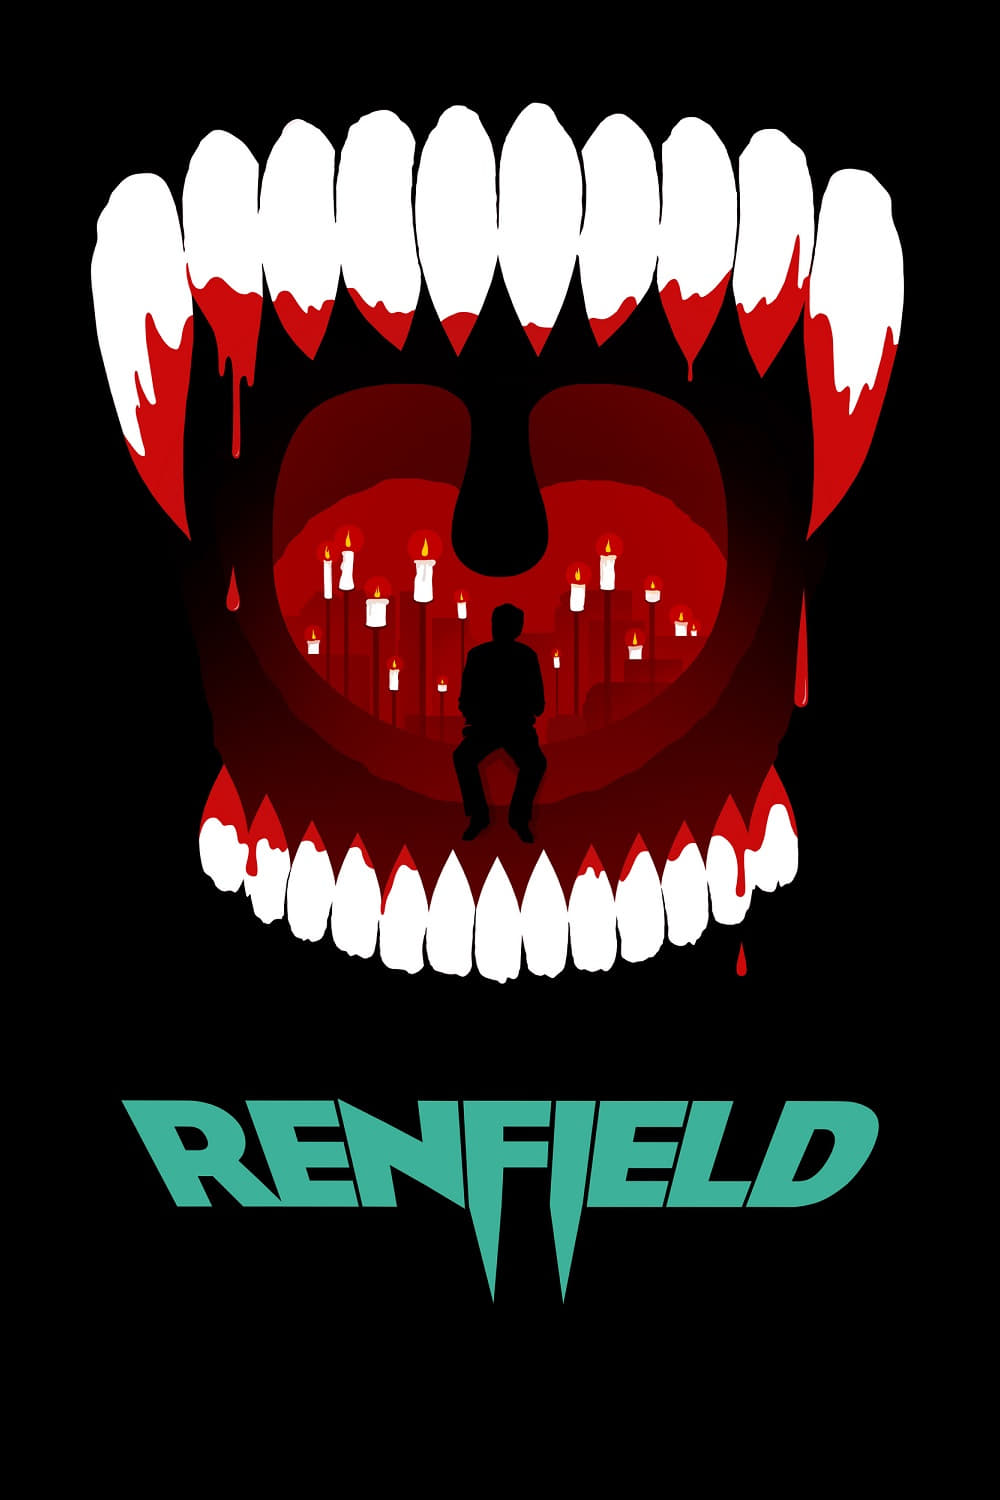 Poster and image movie Renfield